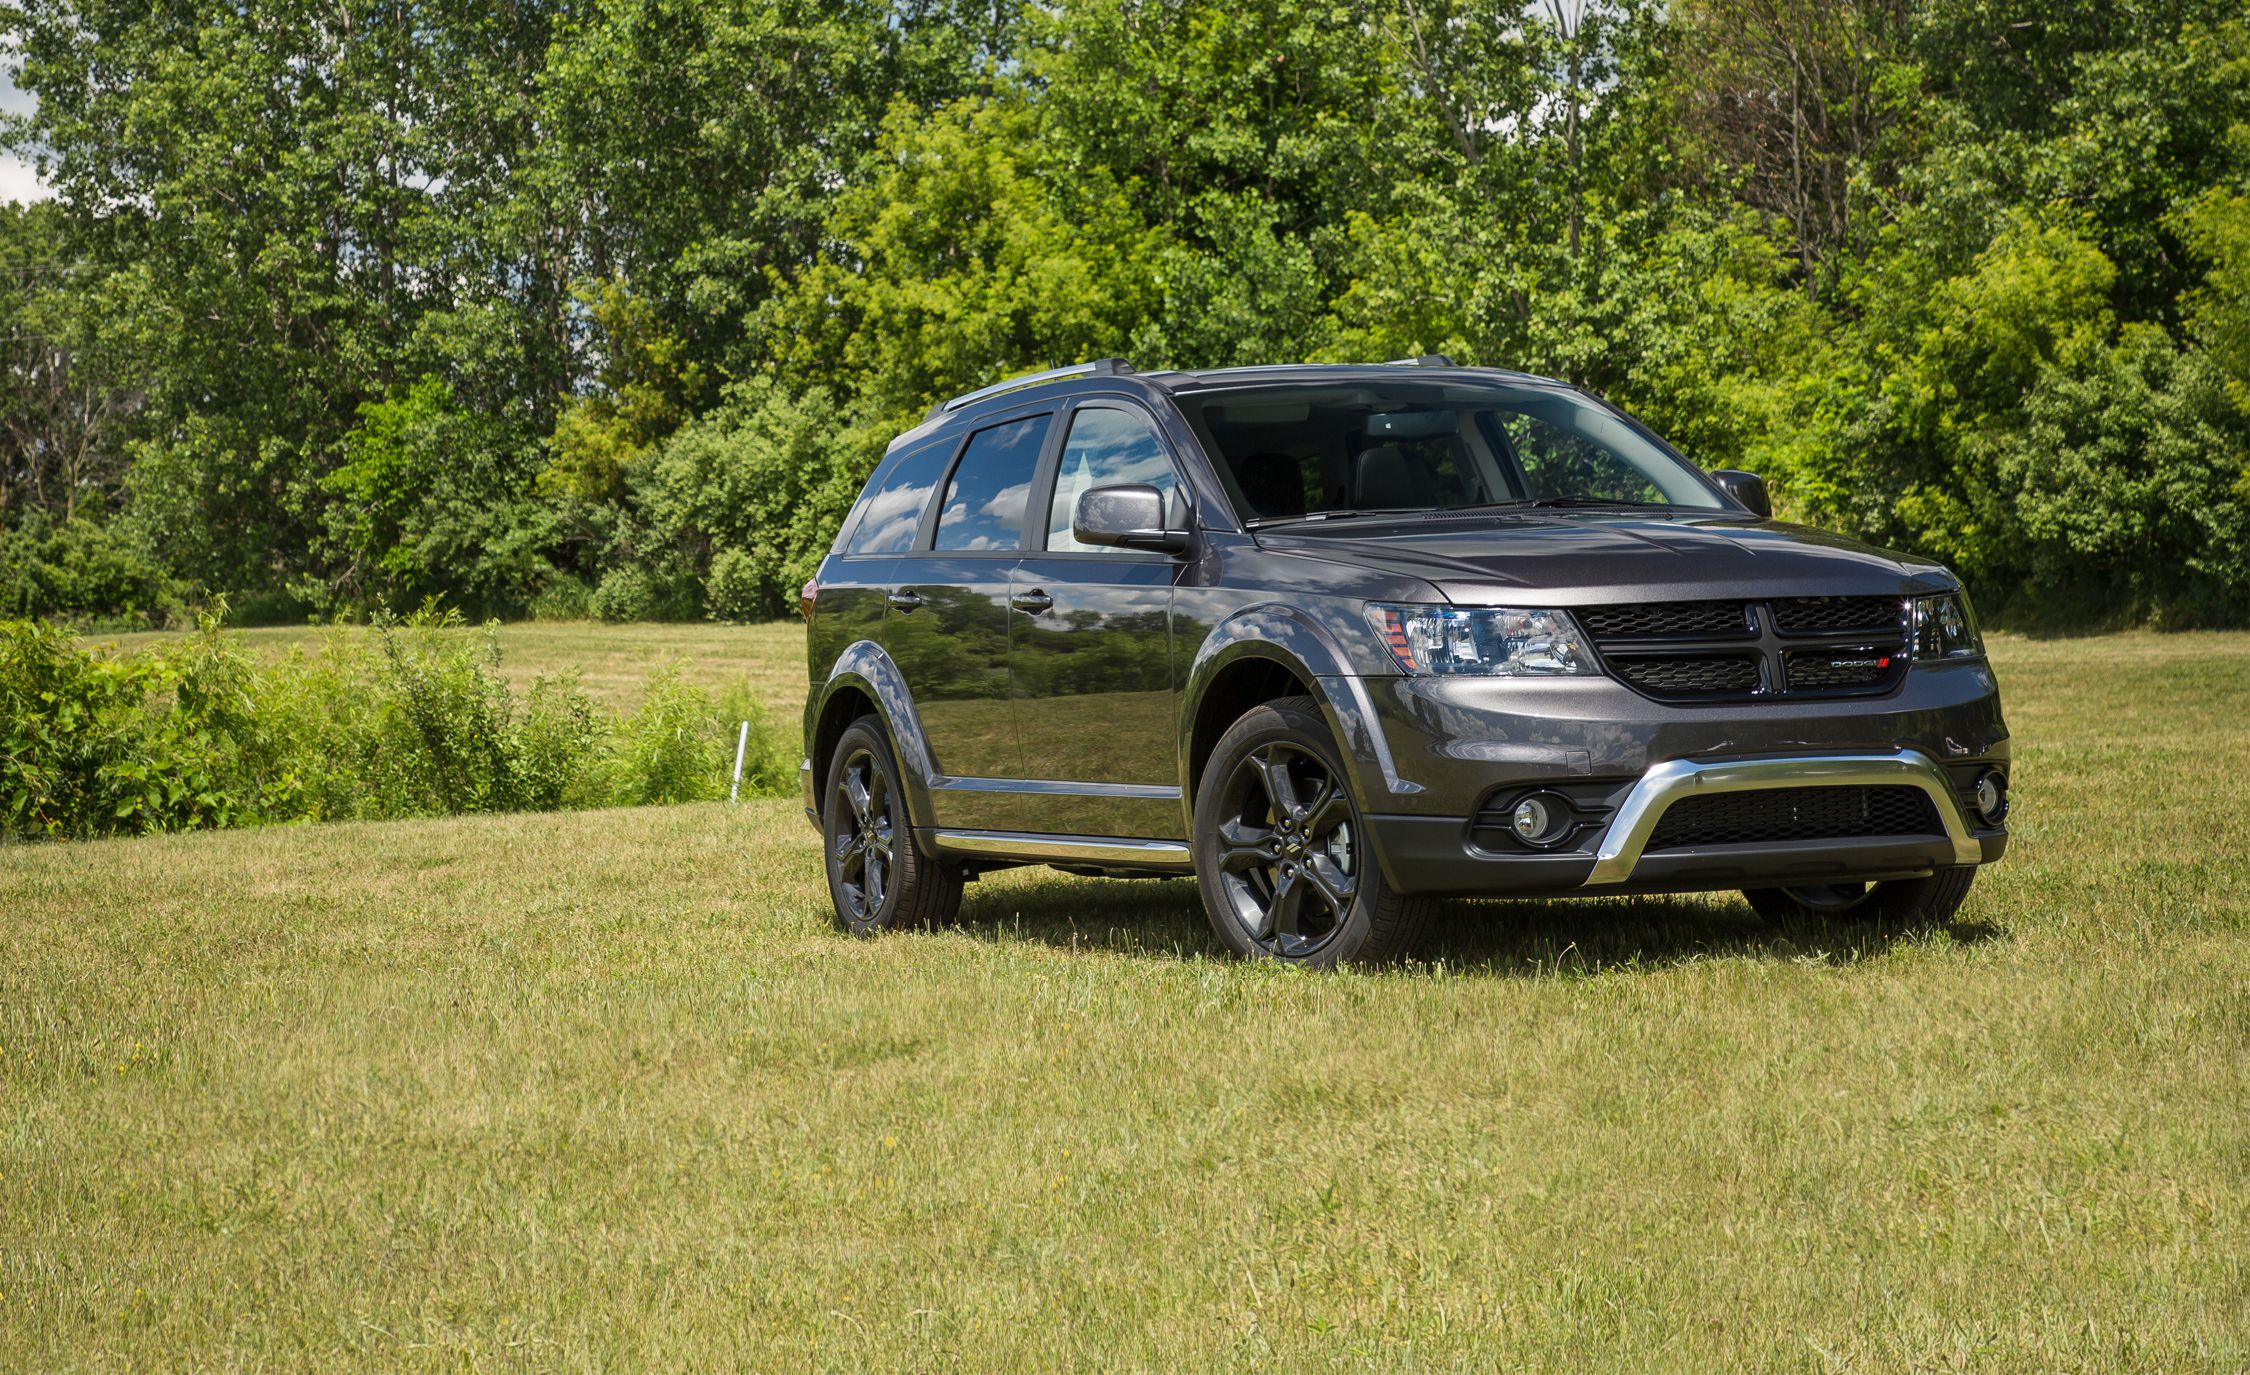 2013 Dodge Journey V-6 AWD Test | Review | Car and Driver